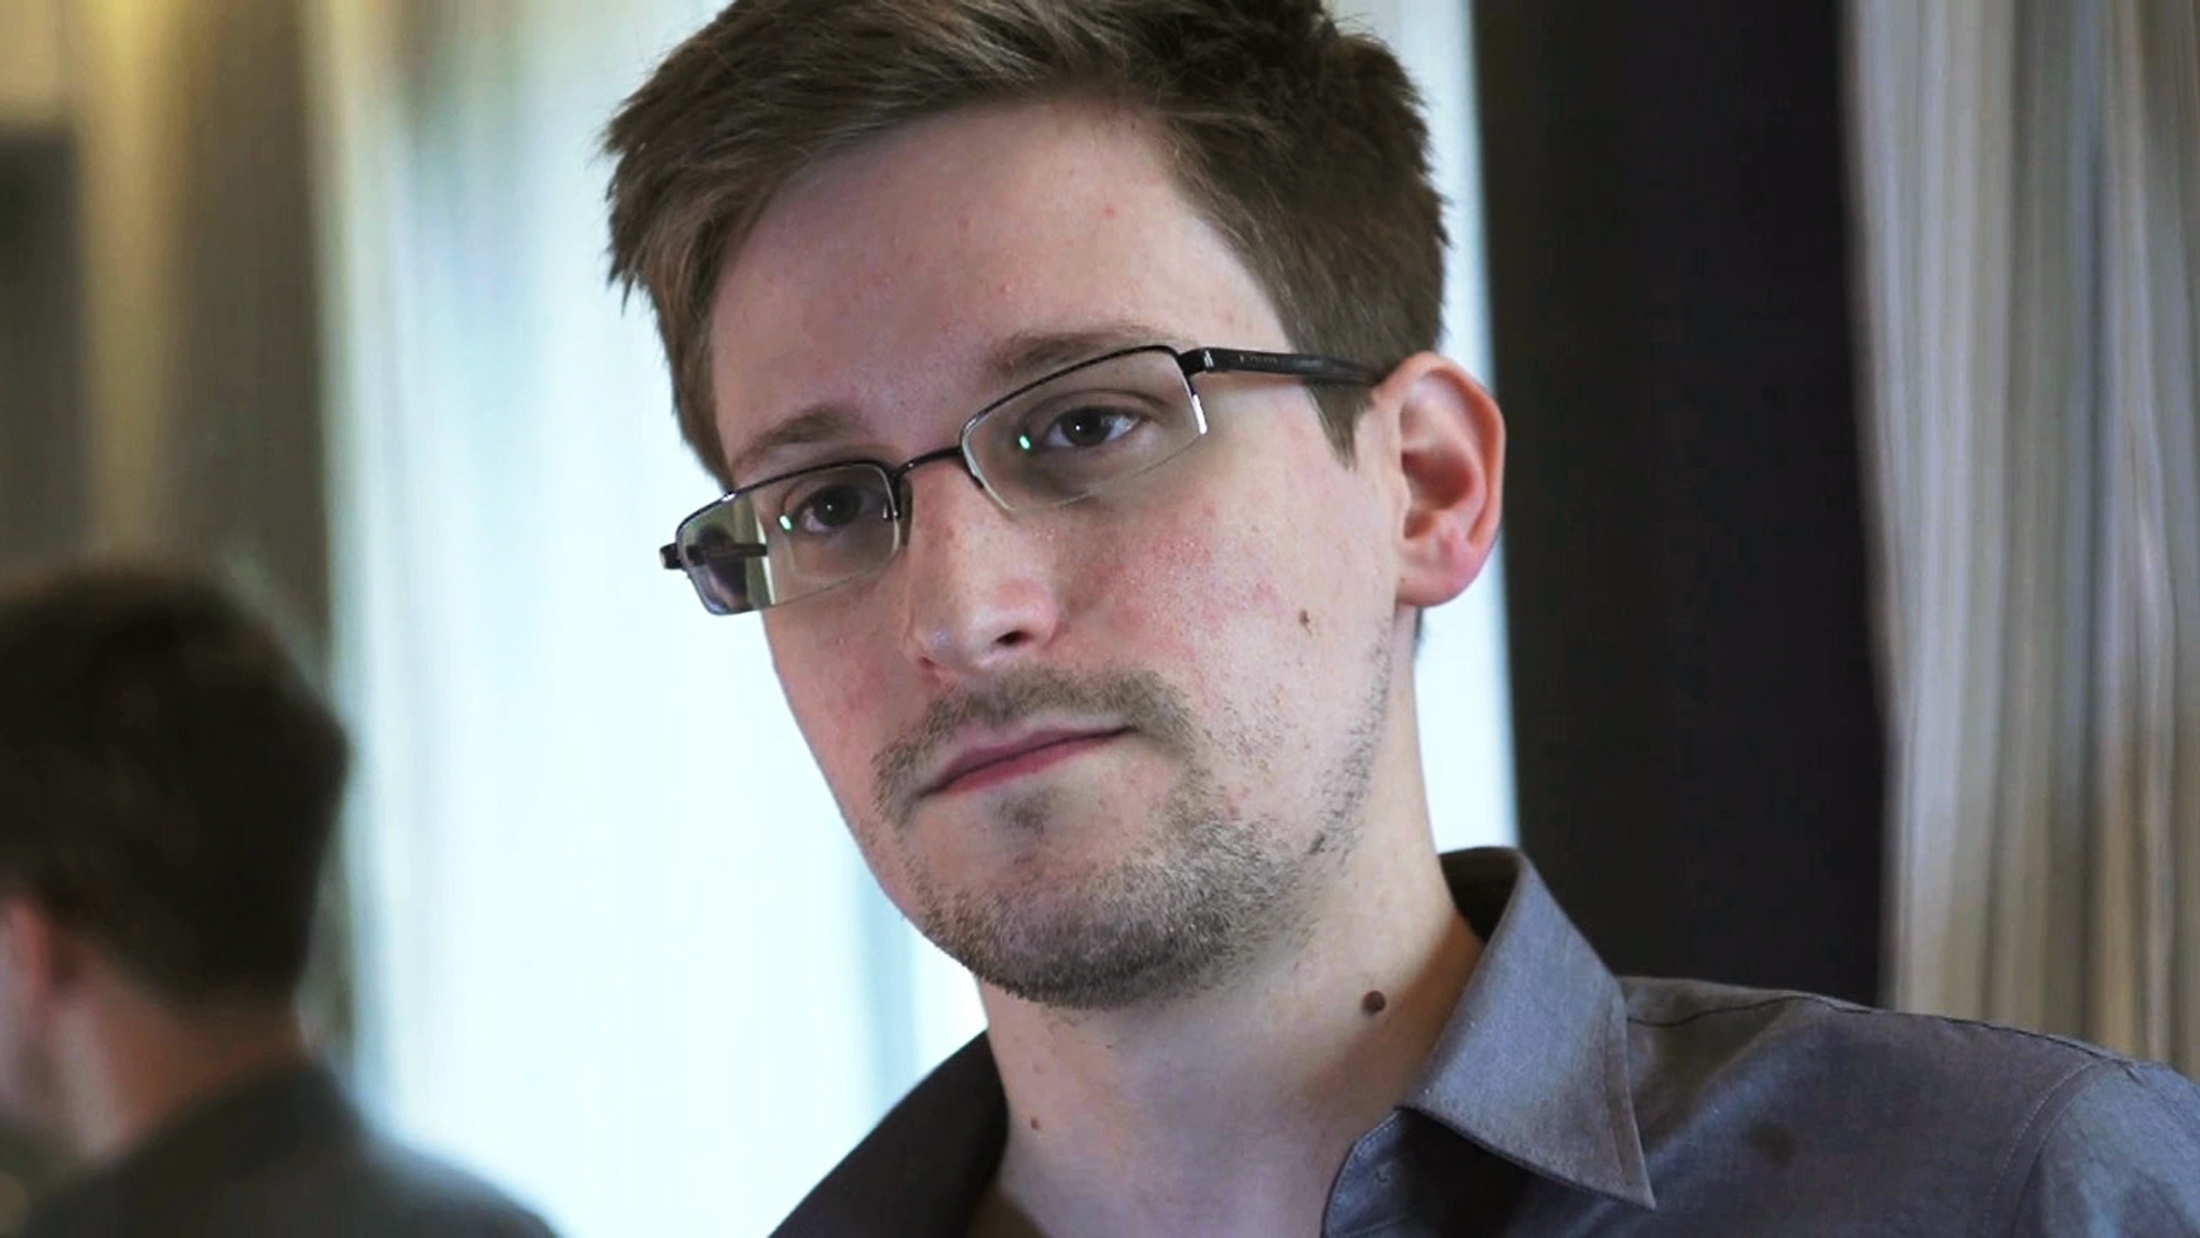 NSA whistle-blower Edward Snowden in a still image taken from video during an interview by the <i>Guardian</i> in his hotel room in Hong Kong on June 6, 2013 (Glenn Greenwald and Laura Poitras—The Guardian/Reuters)